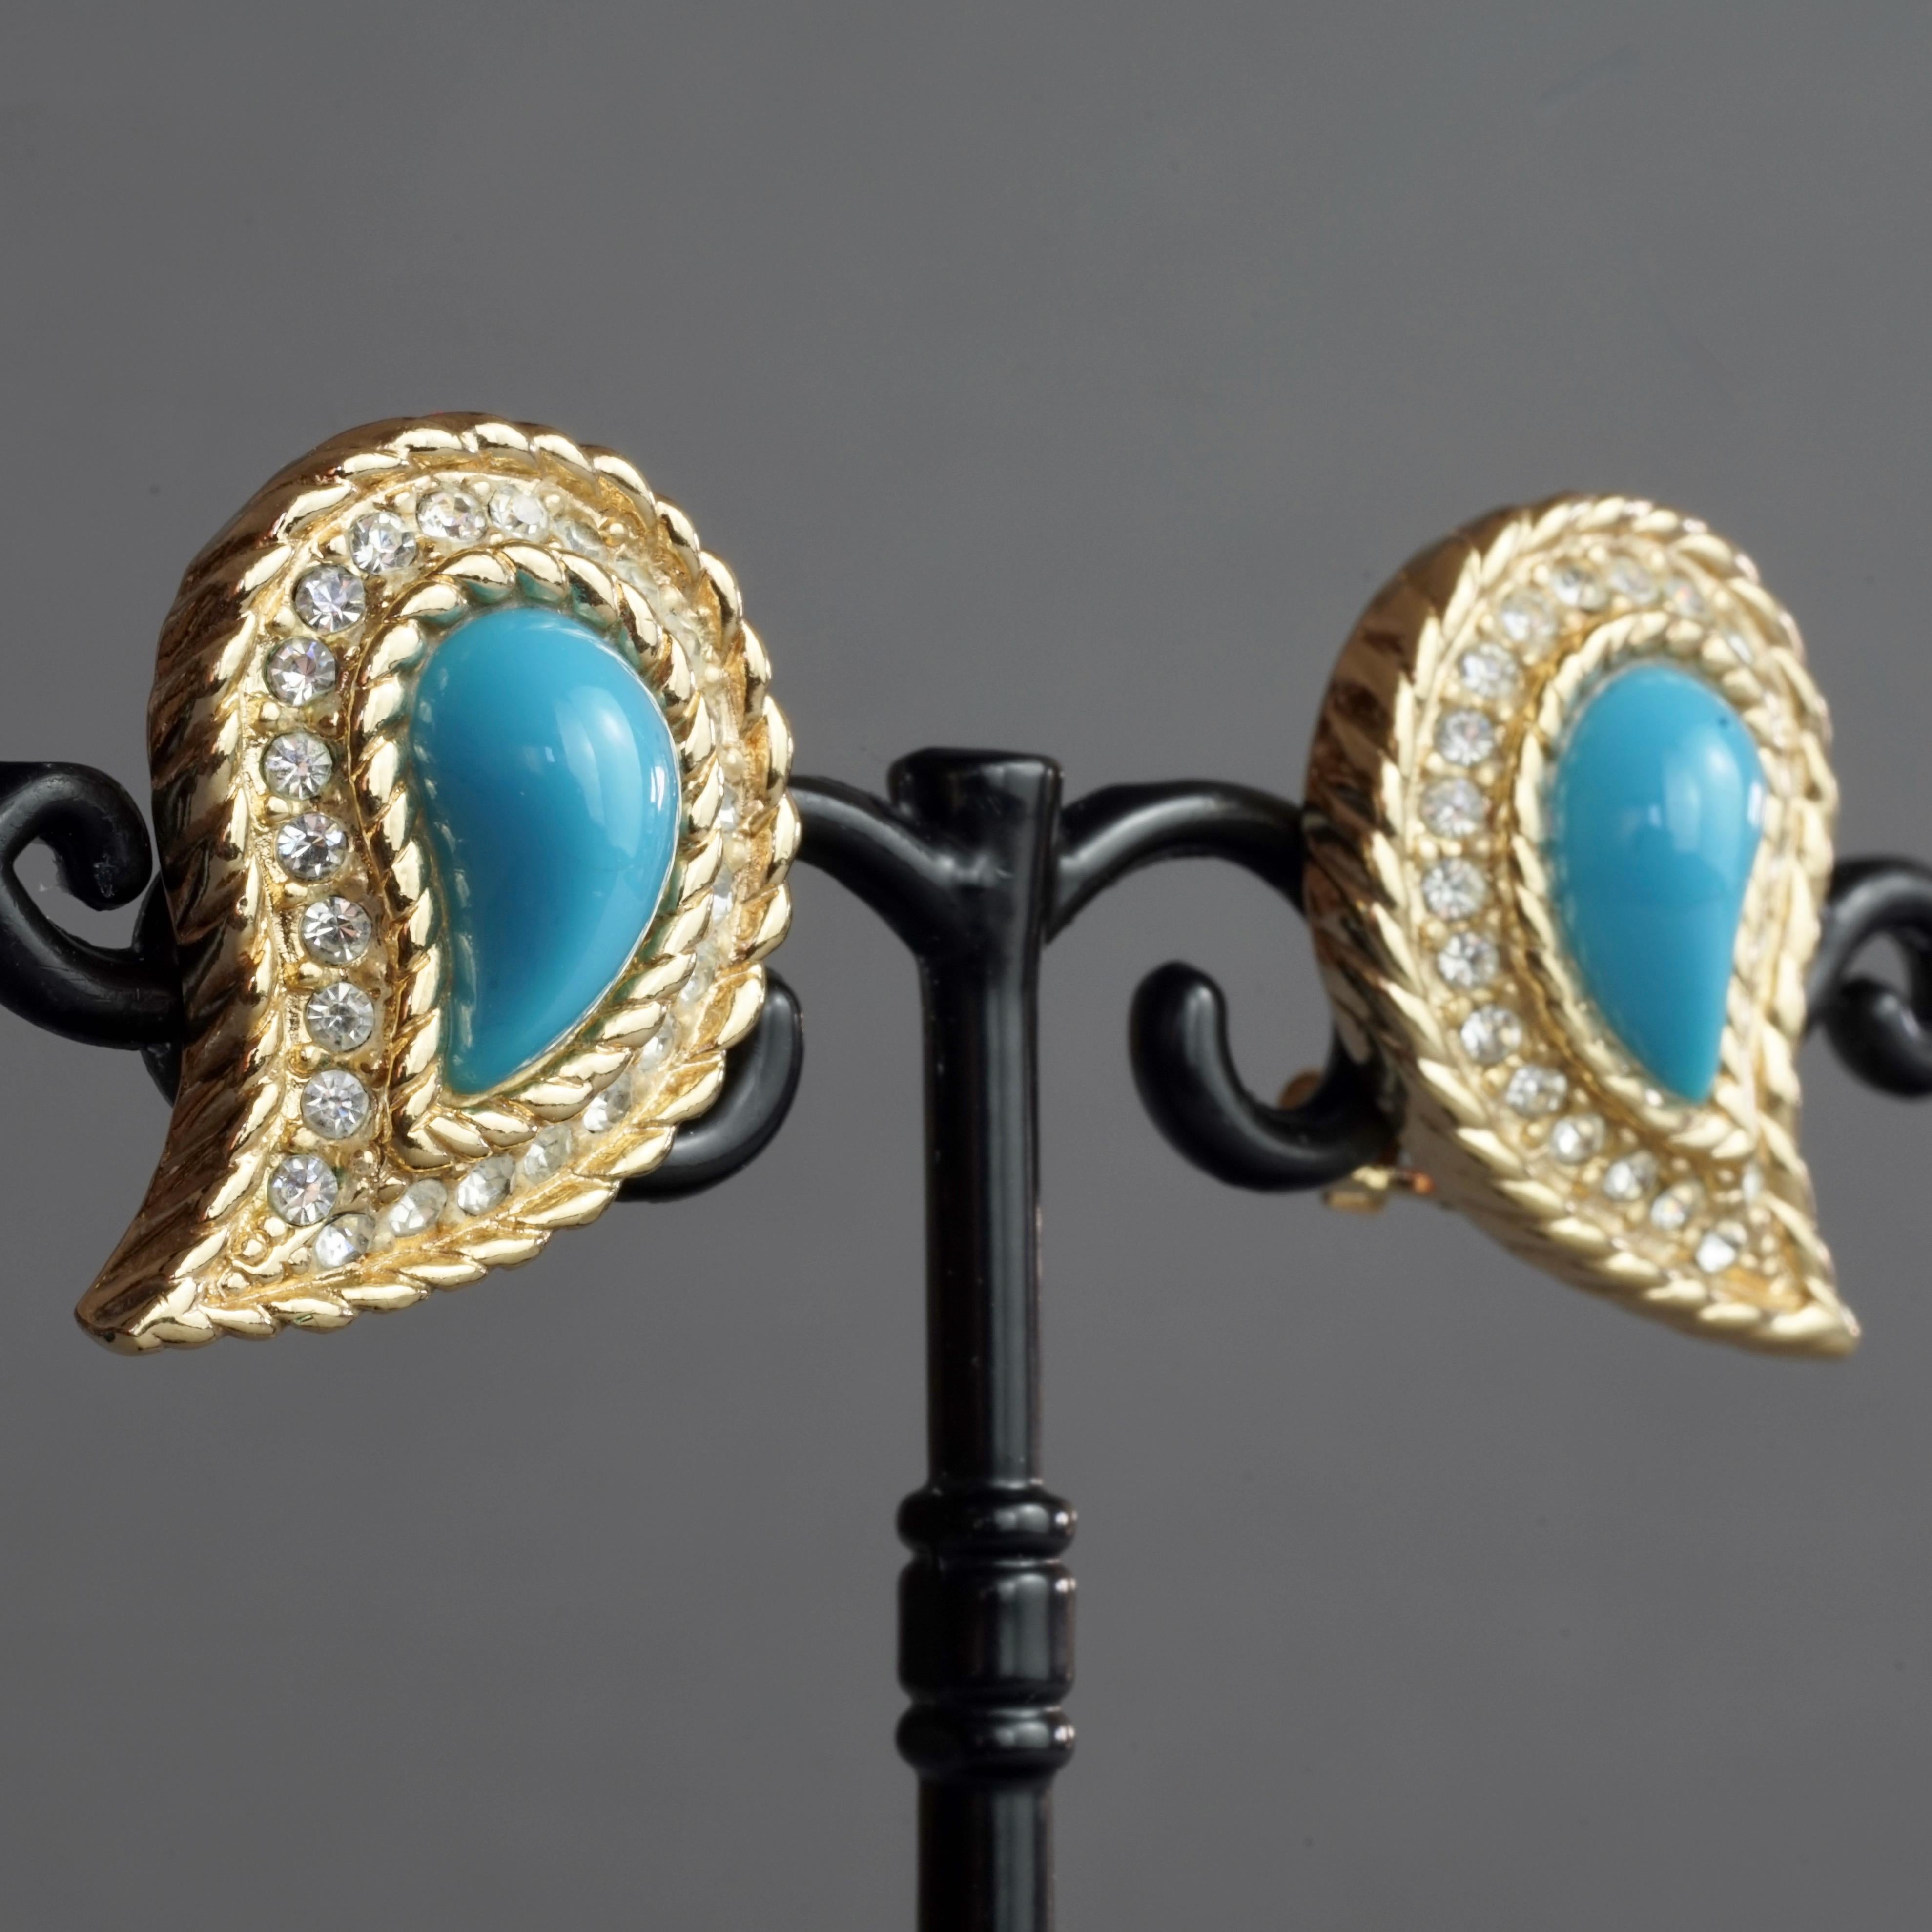 Vintage CHRISTIAN DIOR Paisley Turquoise Cabochon Rhinestone Earrings In Excellent Condition For Sale In Kingersheim, Alsace